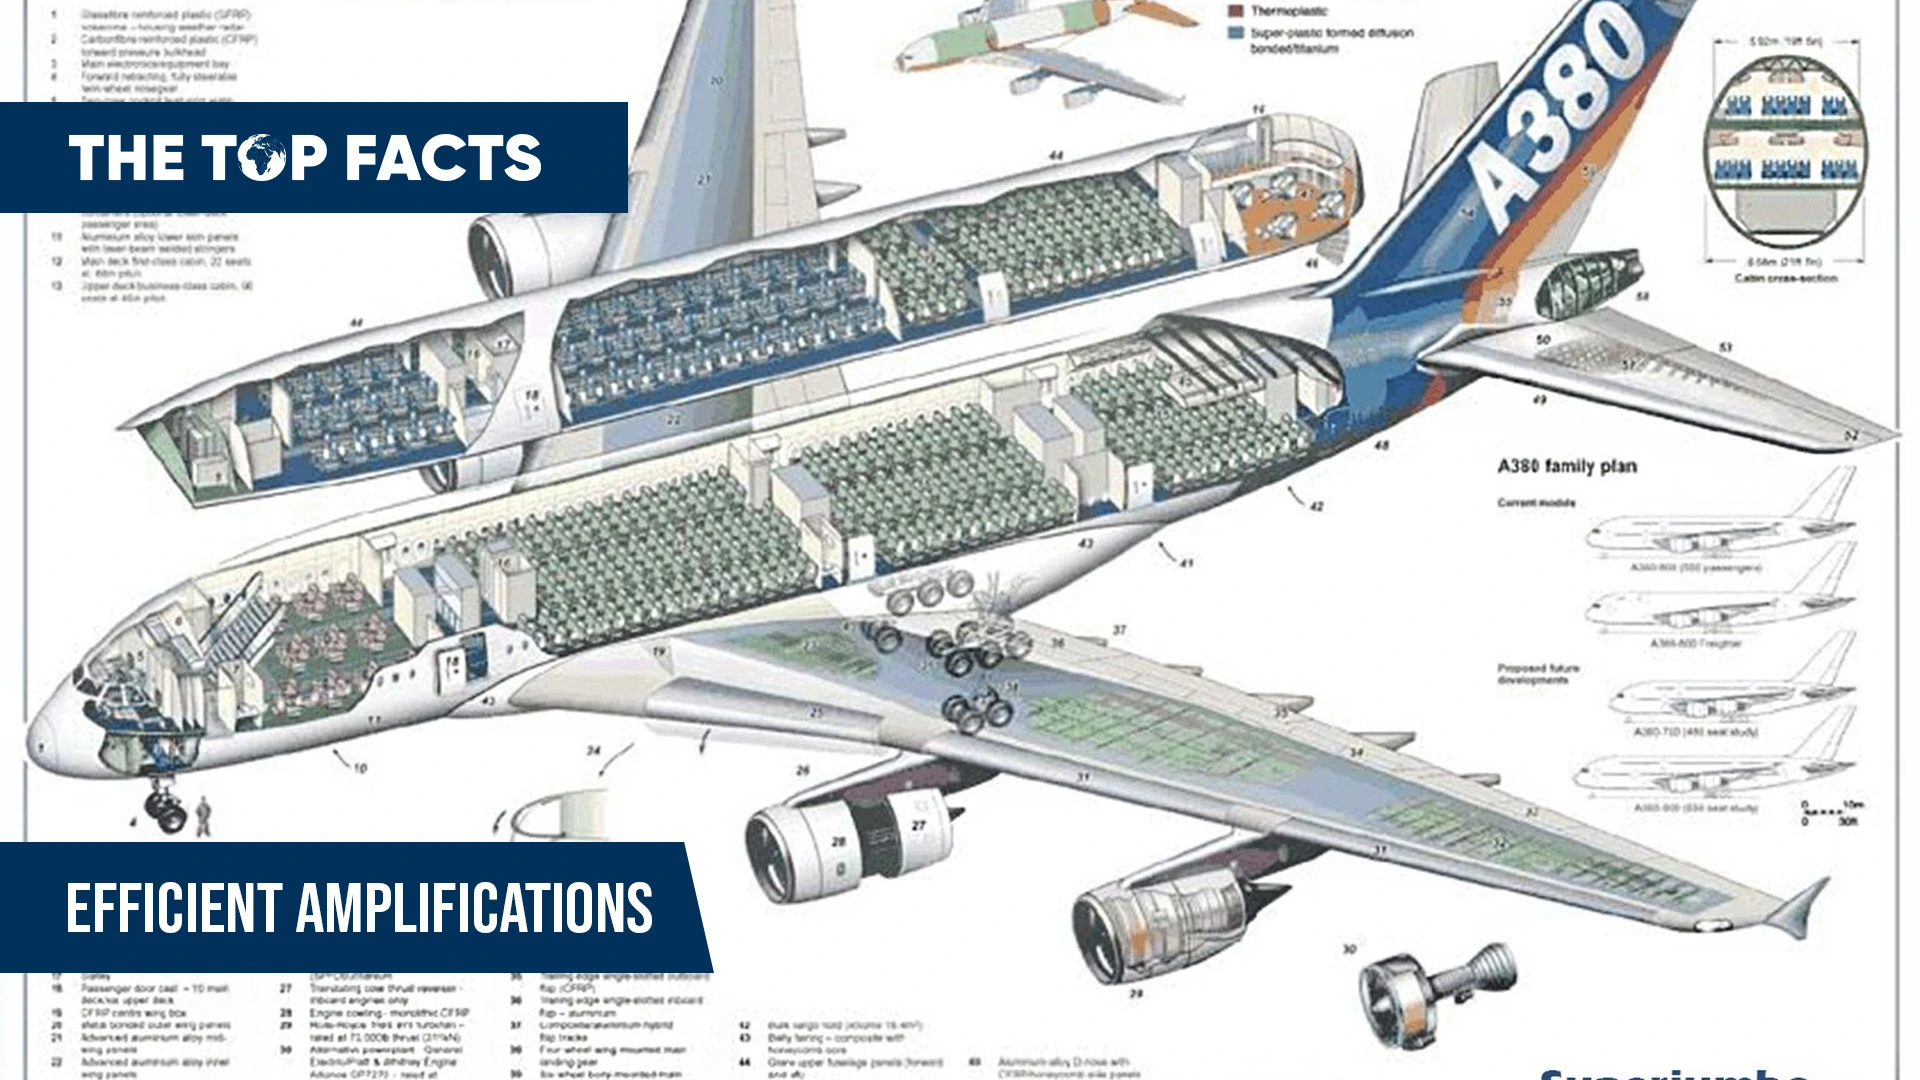 The Airbus A320 family of aircraft have undergone several efficient modifications and upgrades.